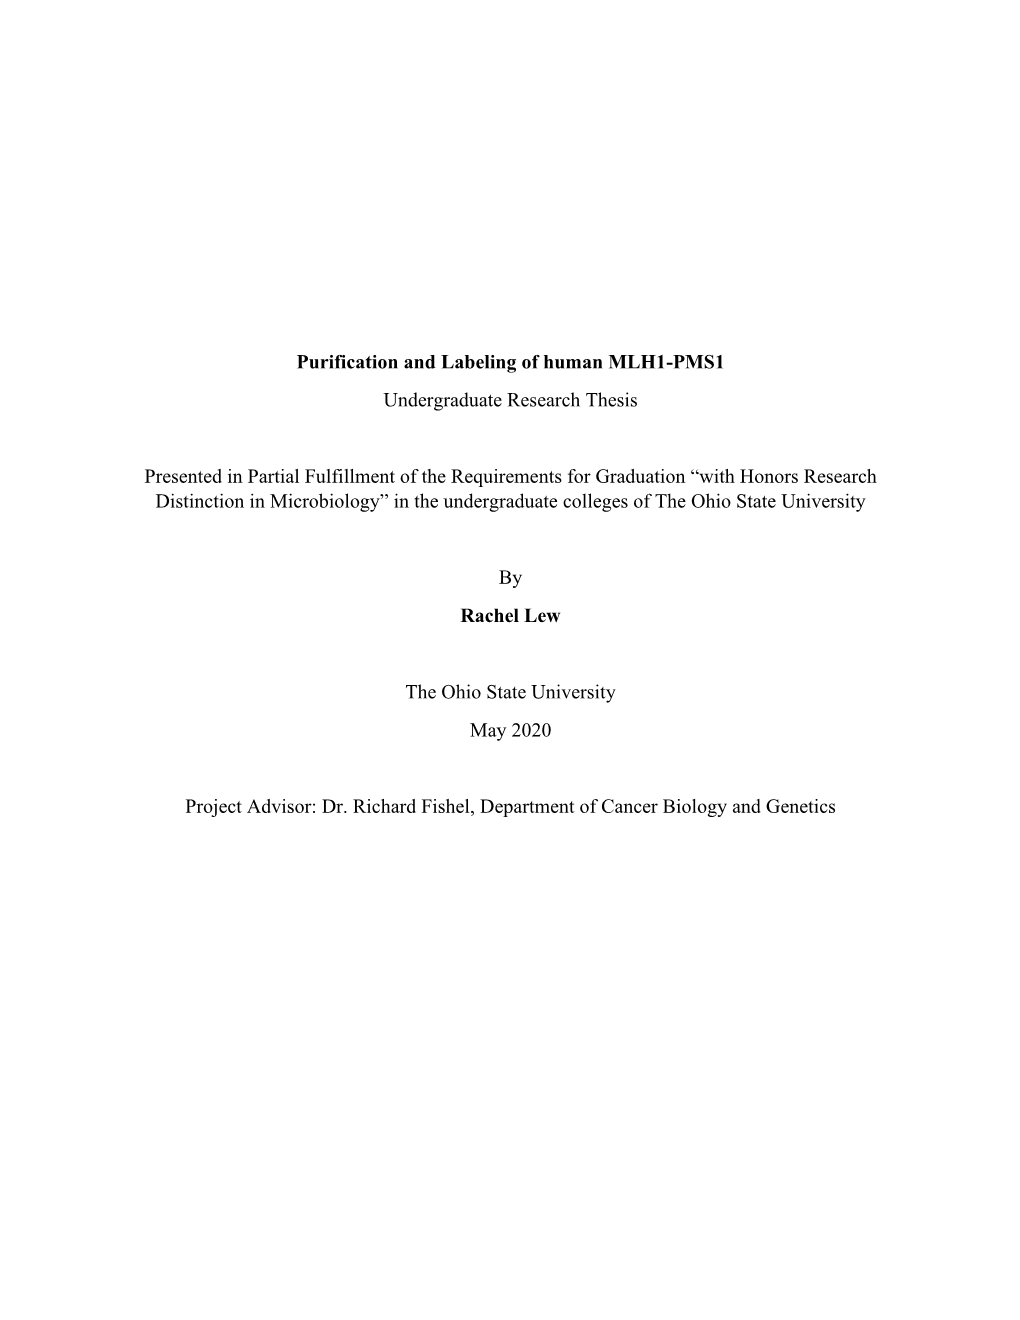 Purification and Labeling of Human MLH1-PMS1 Undergraduate Research Thesis Presented in Partial Fulfillment of the Requirements